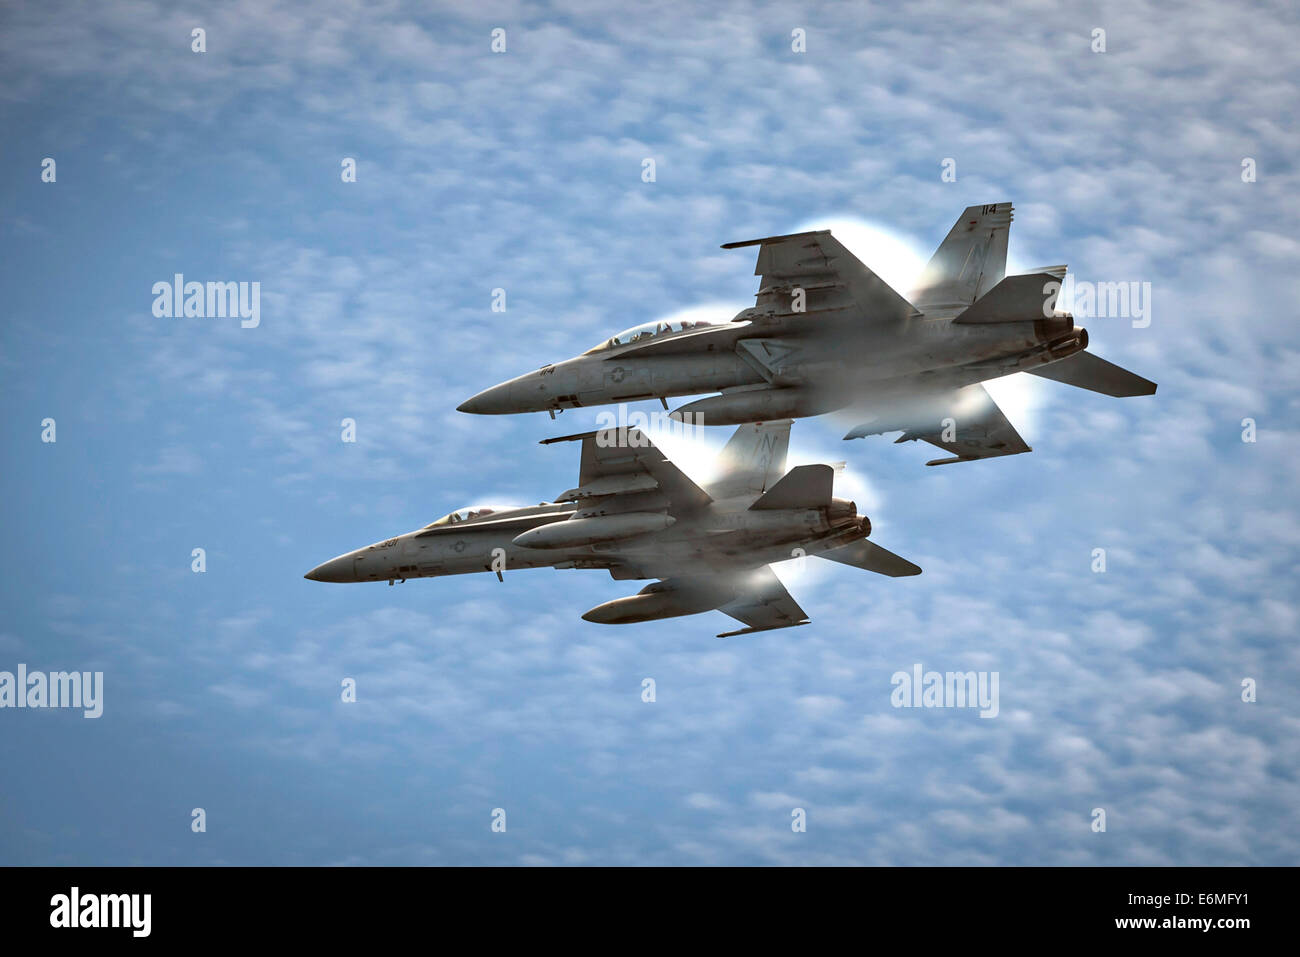 A US Navy F/A-18C Hornet fighter aircraft and a F/A-18E Super Hornet fighter fly in formation over the flight deck of aircraft carrier USS Carl Vinson August 24, 2014 off the coast of Southern California. Stock Photo